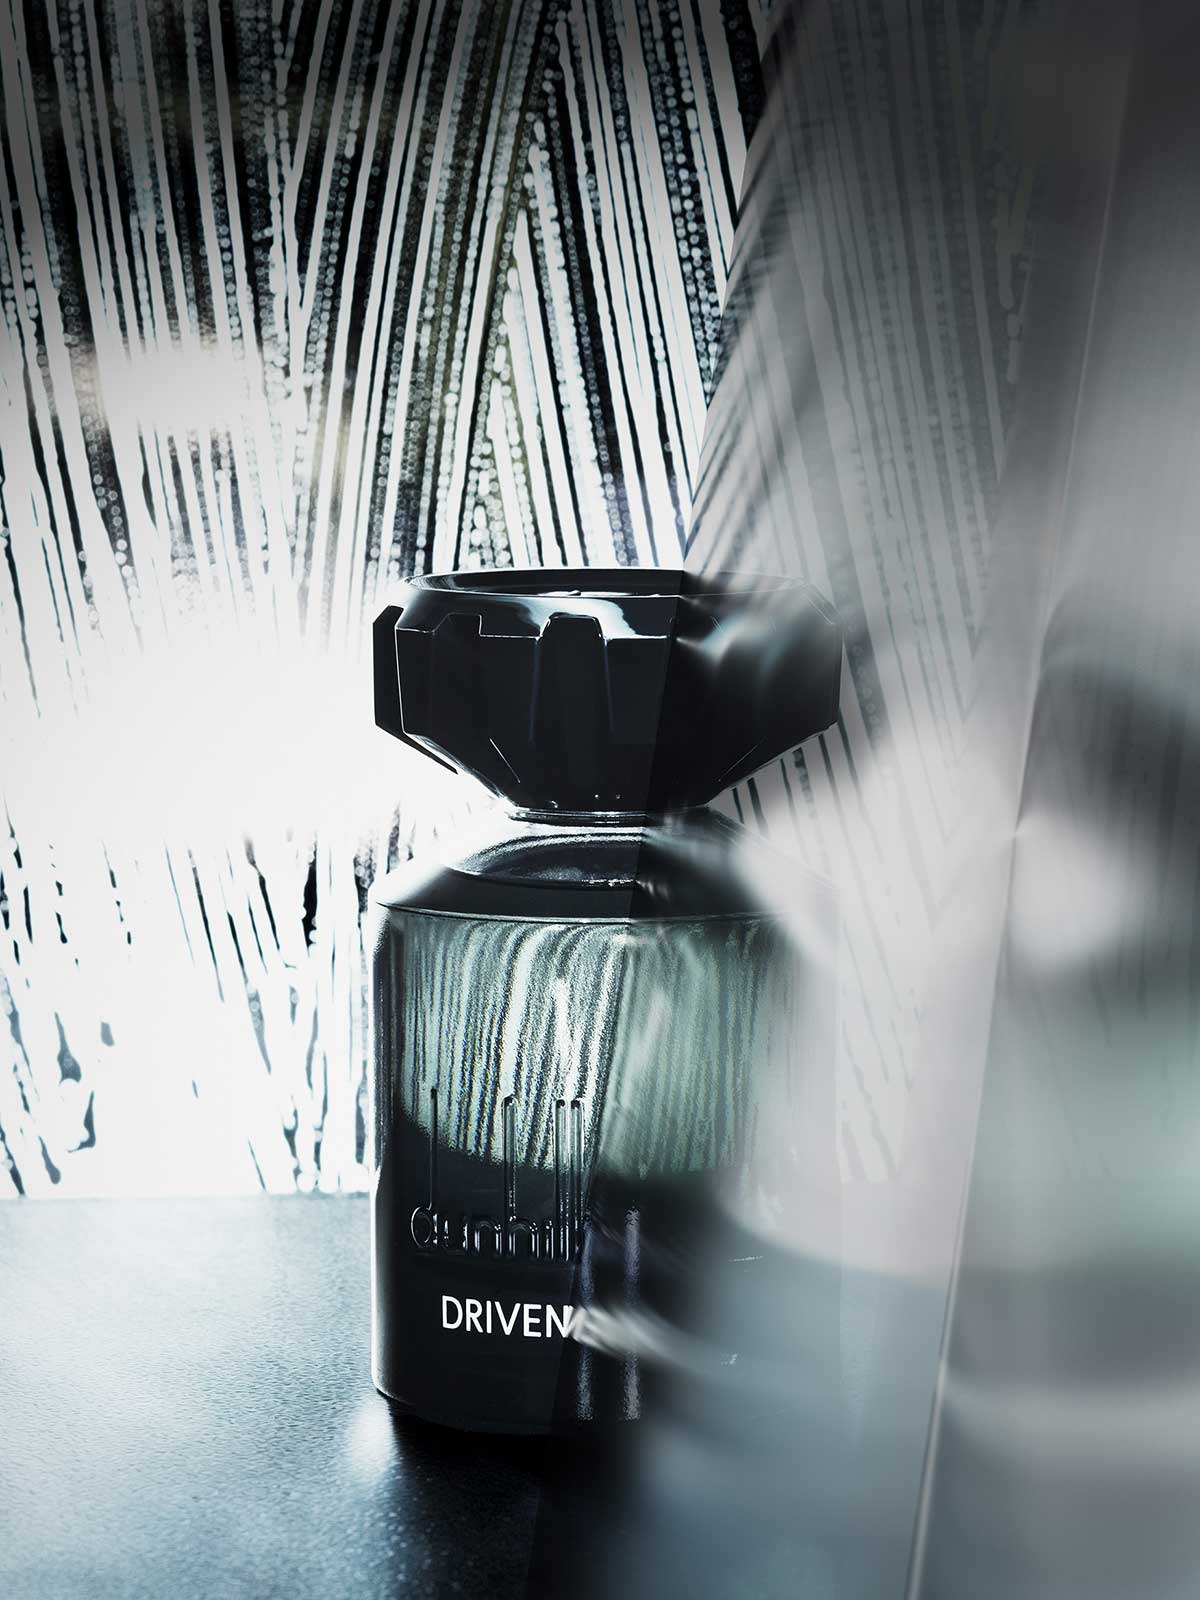 Dunhill Driven